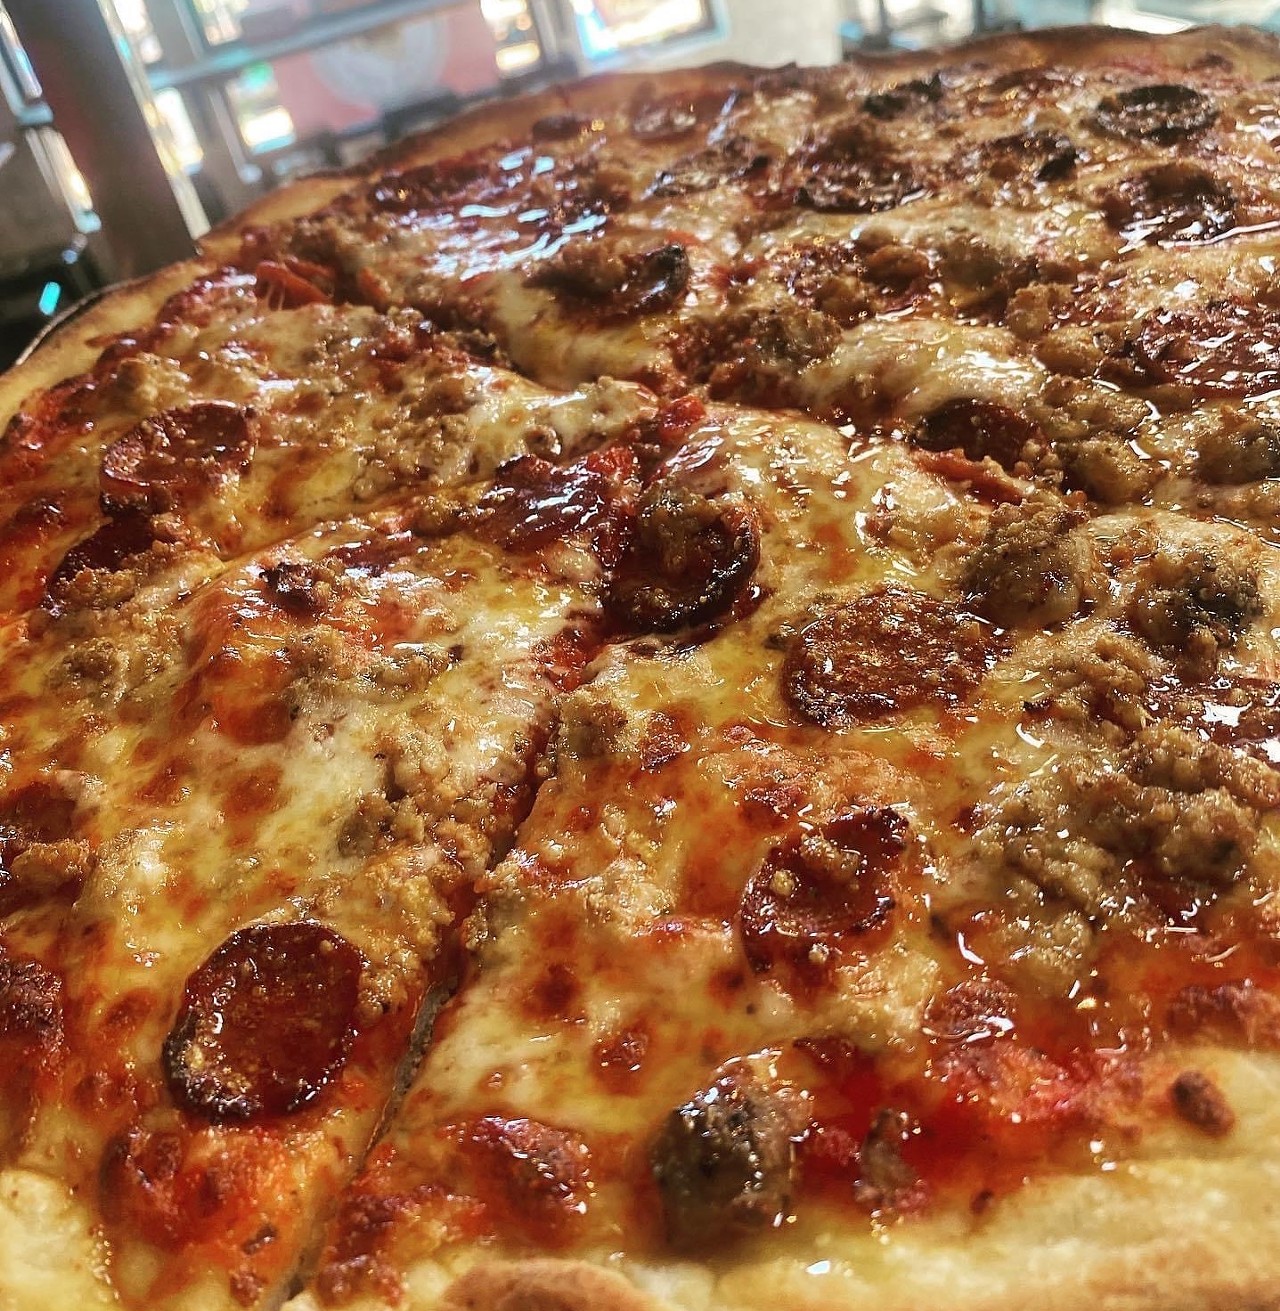  Geraci’s 
29425 Chagrin Blvd., Pepper Pike 
At Geraci’s in Pepper Pike, they're offering their 10 inch honey pie with red sauce, mozzarella, romano, pepperoni, sausage and Akron Honey habanero hot honey. Gluten free option available.